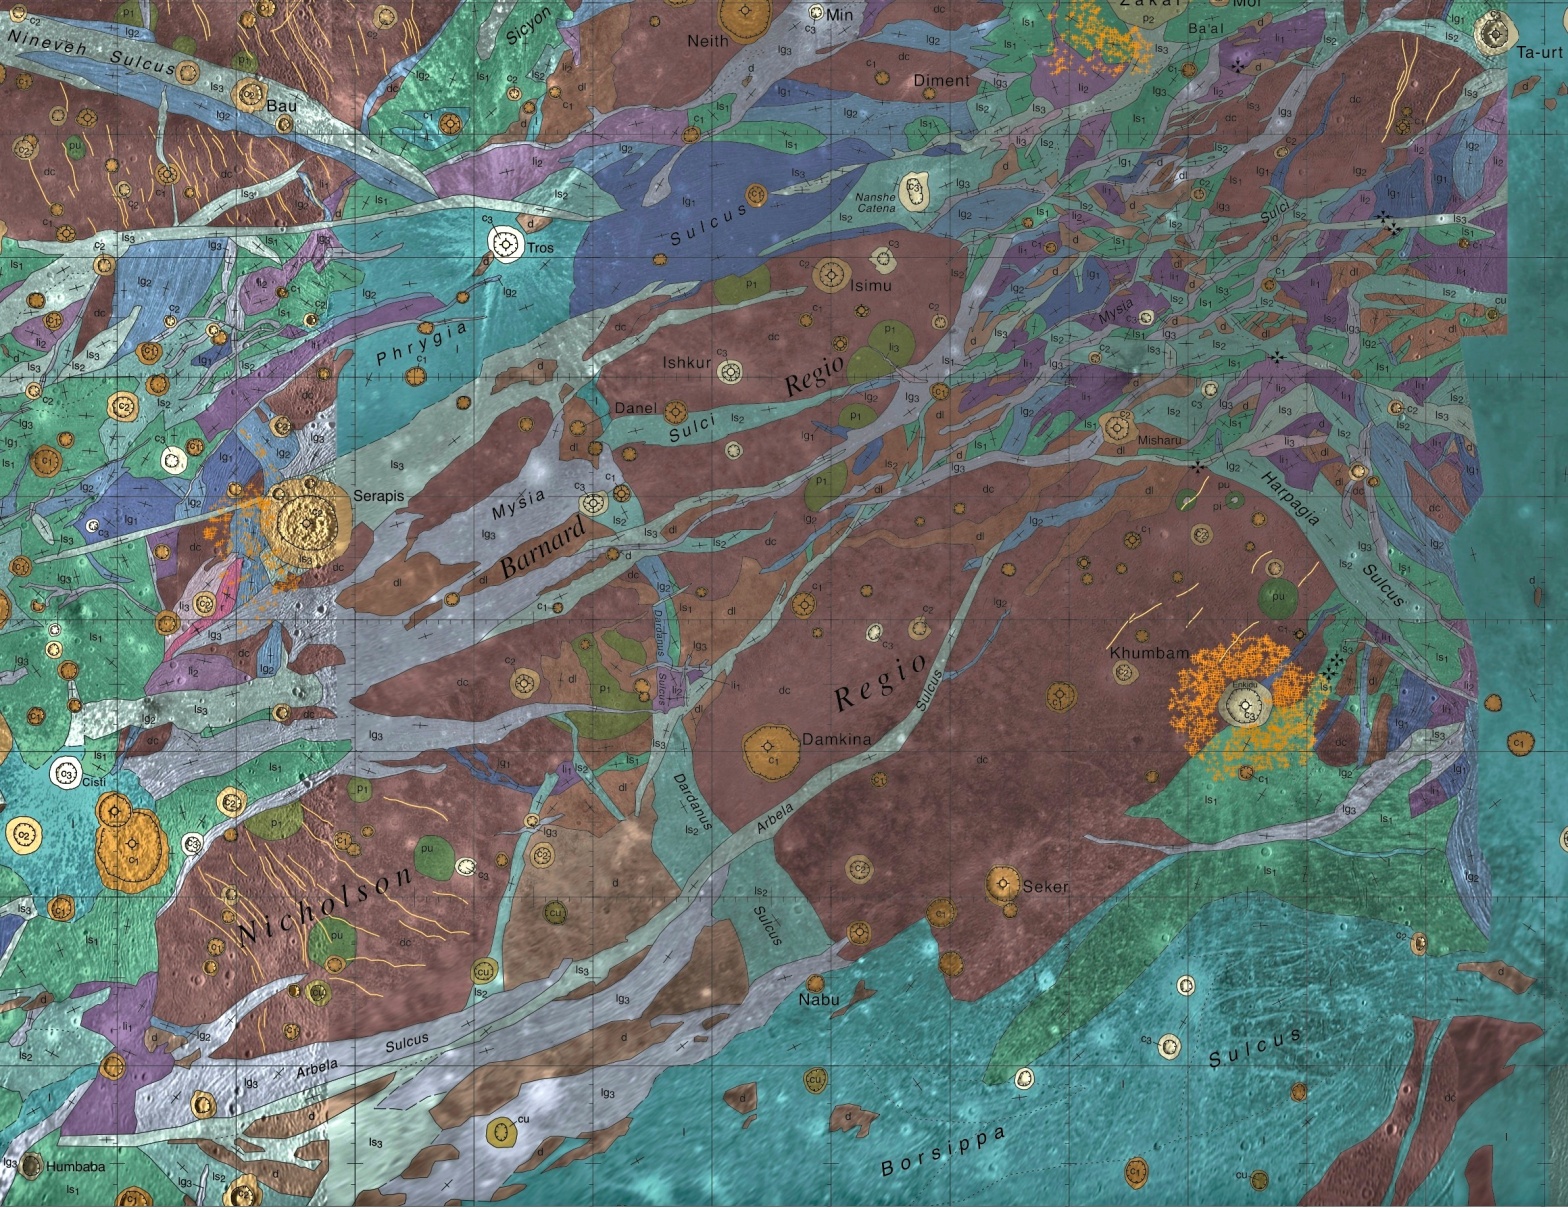 Inter-Planetary Topography and Splashes of Colour